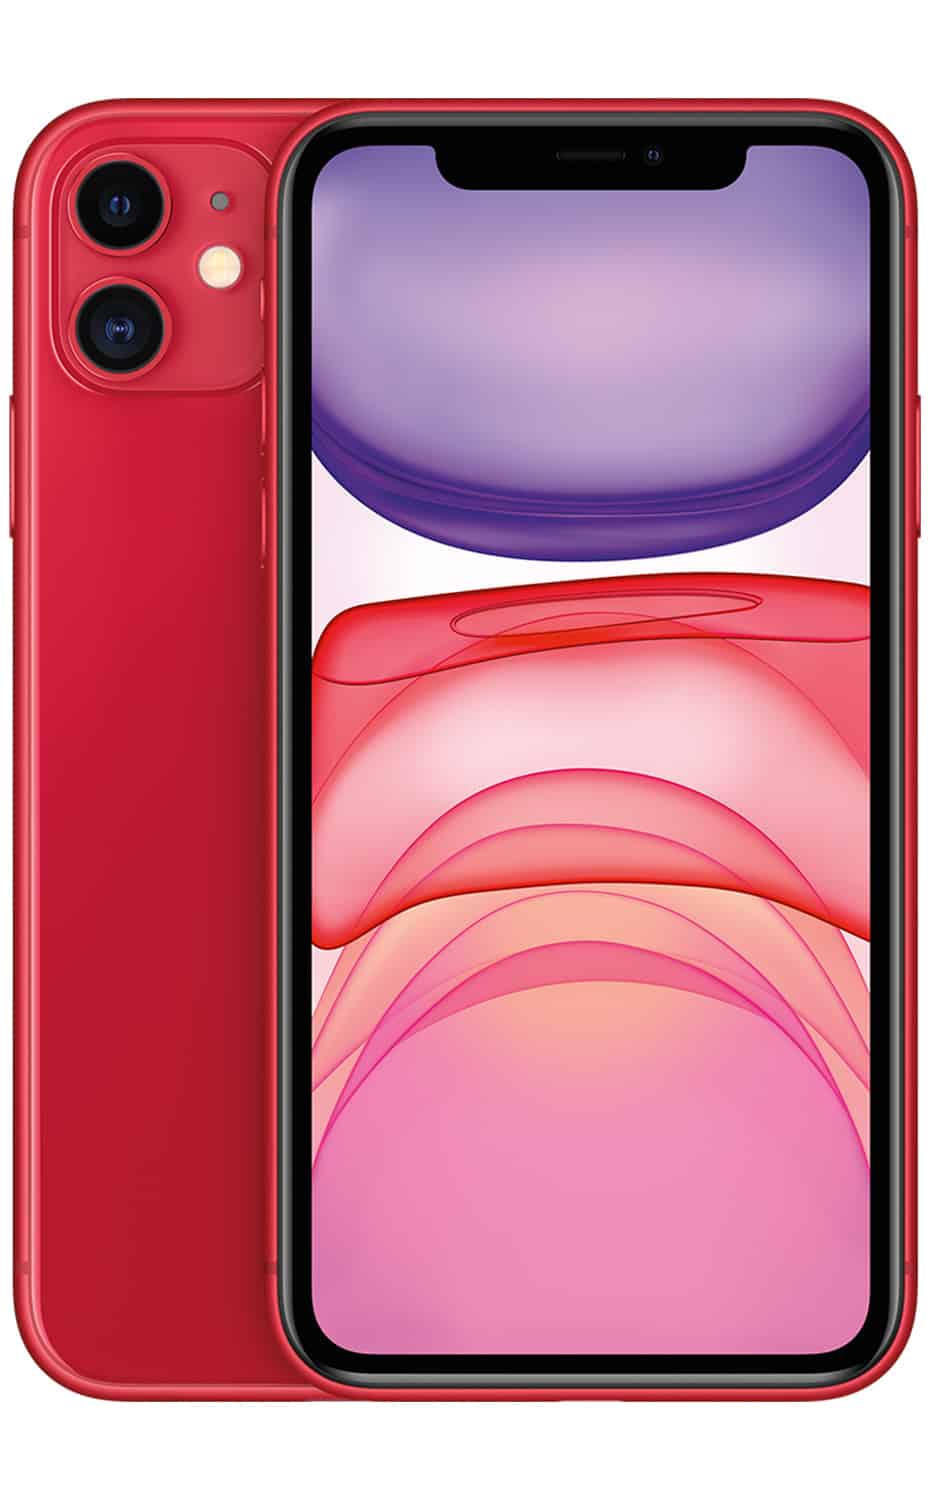 Photo Credit - T-Mobile. Apple iPhone 11